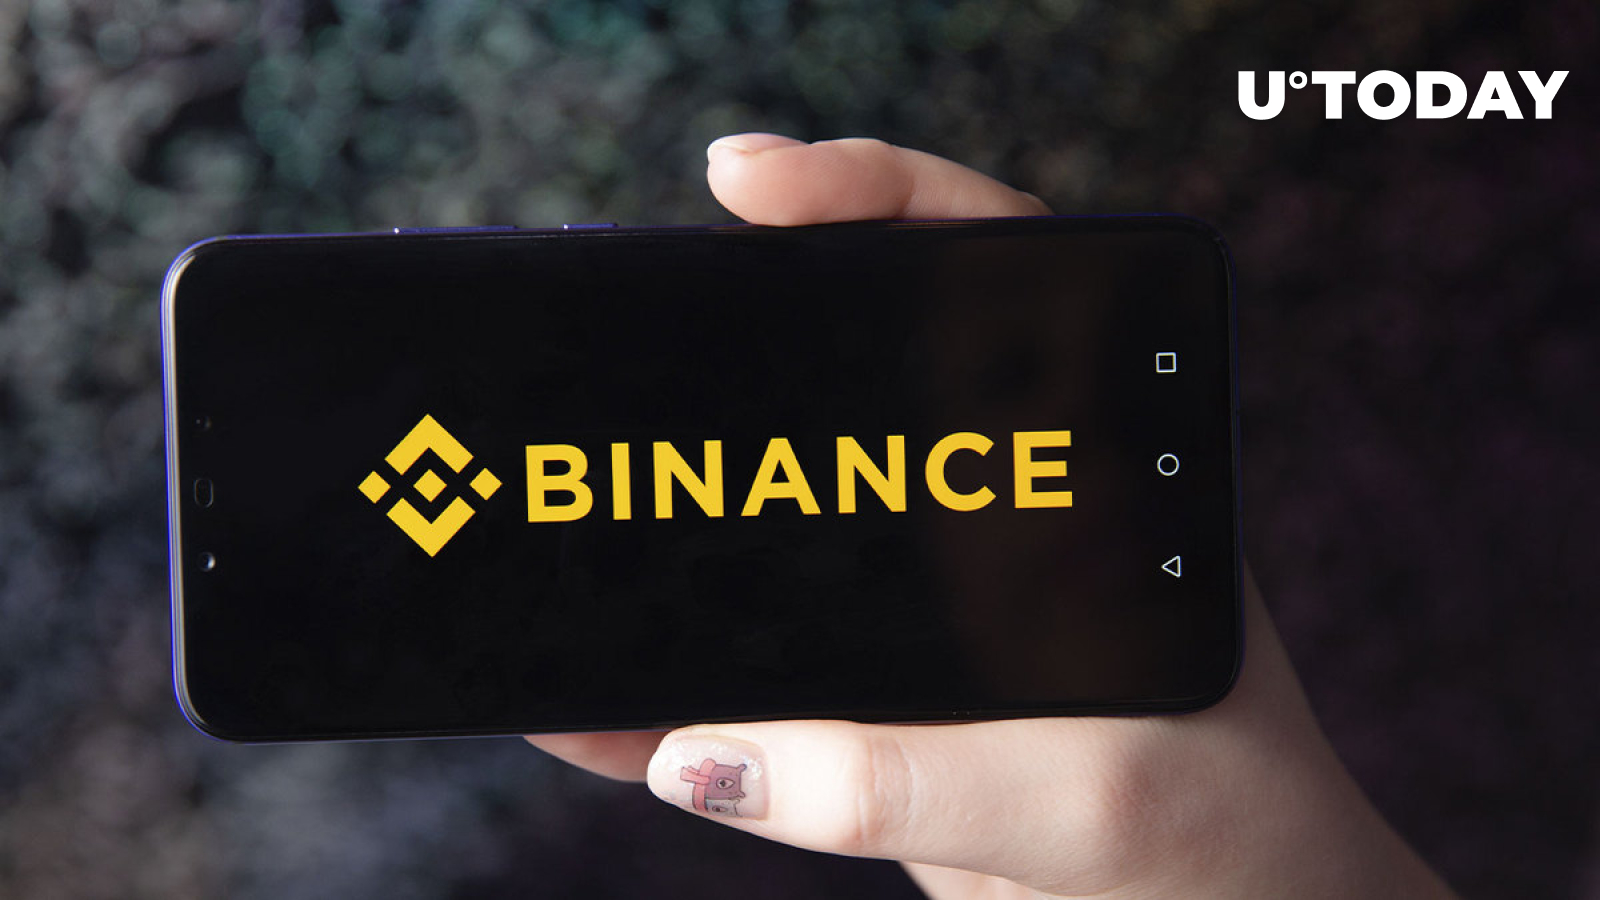 New Binance CEO? Exchange Calls Bloomberg’s Claims ‘Speculation’